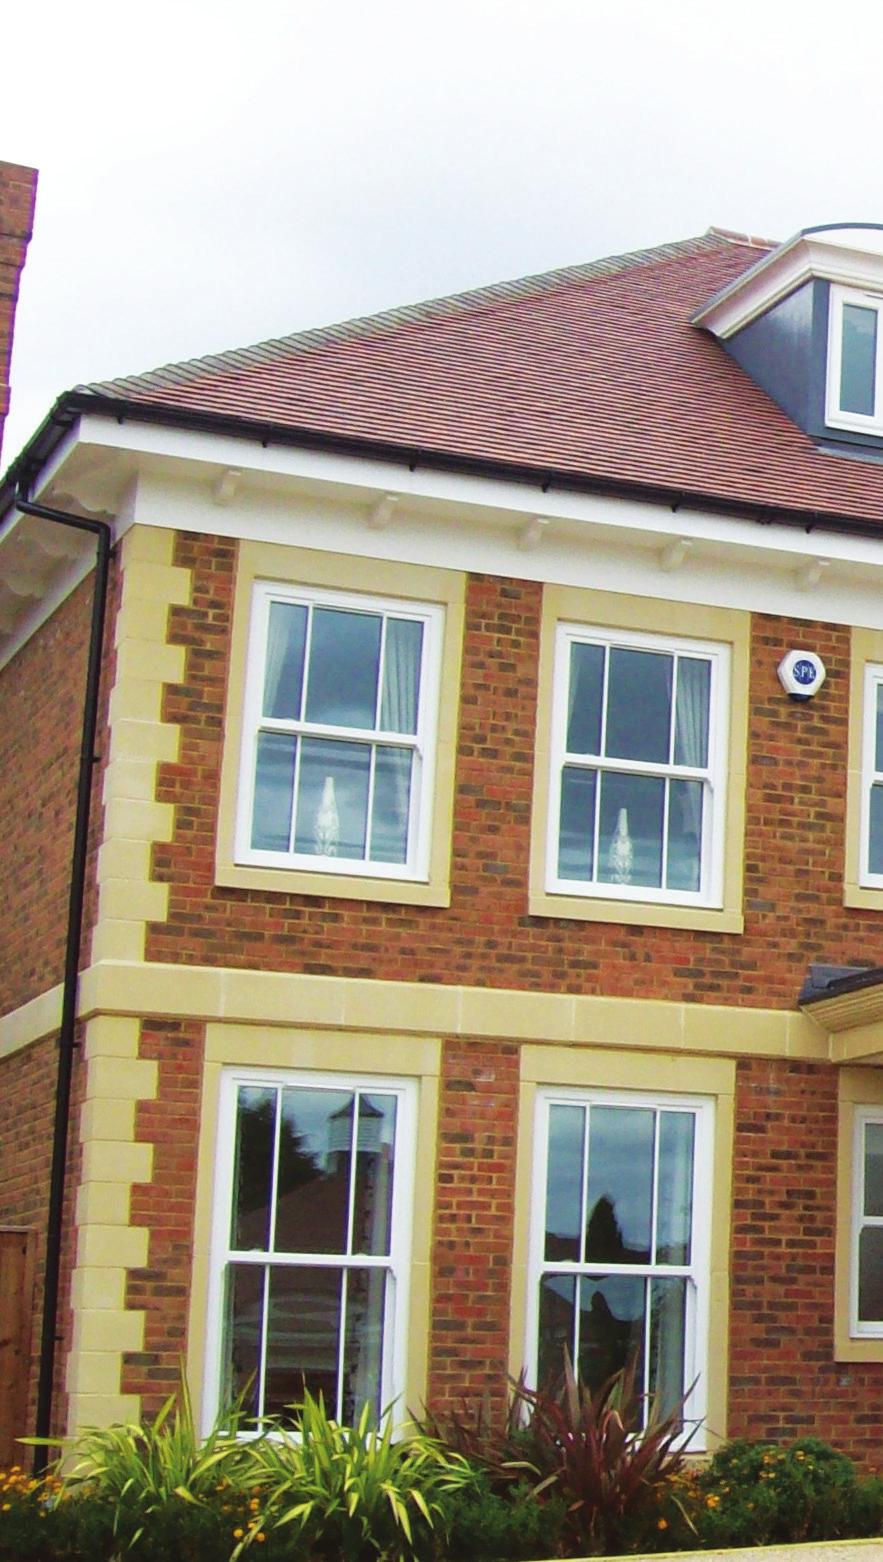 KAT sash windows authentically replicate beautiful Victorian and Edwardian period windows, meticulously combining